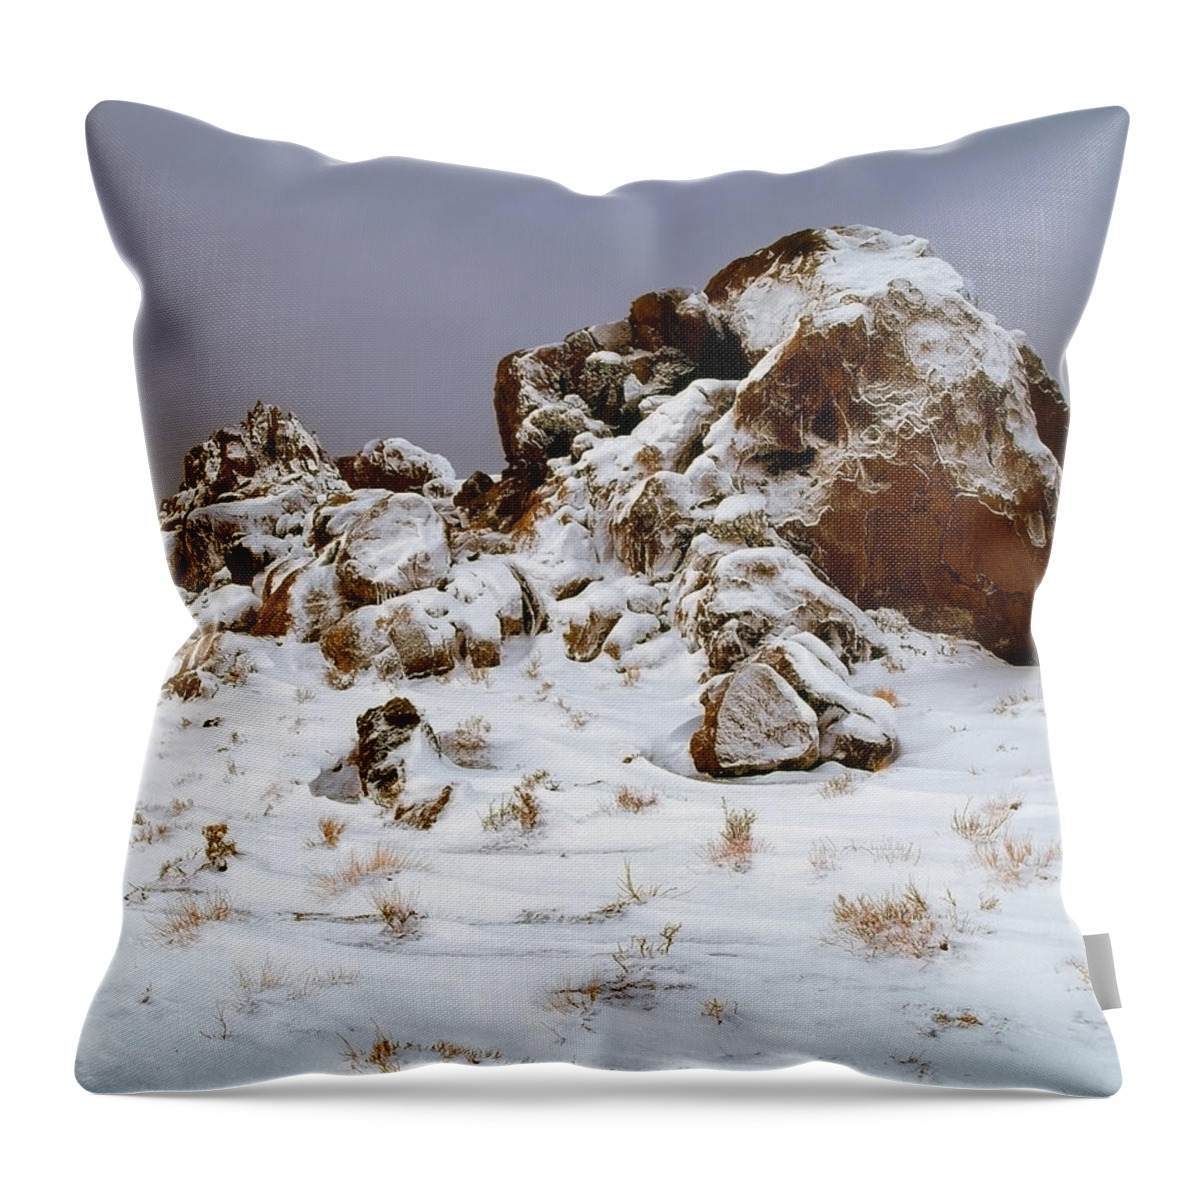 Eastern Throw Pillow featuring the photograph Snow Stones by Paul Breitkreuz